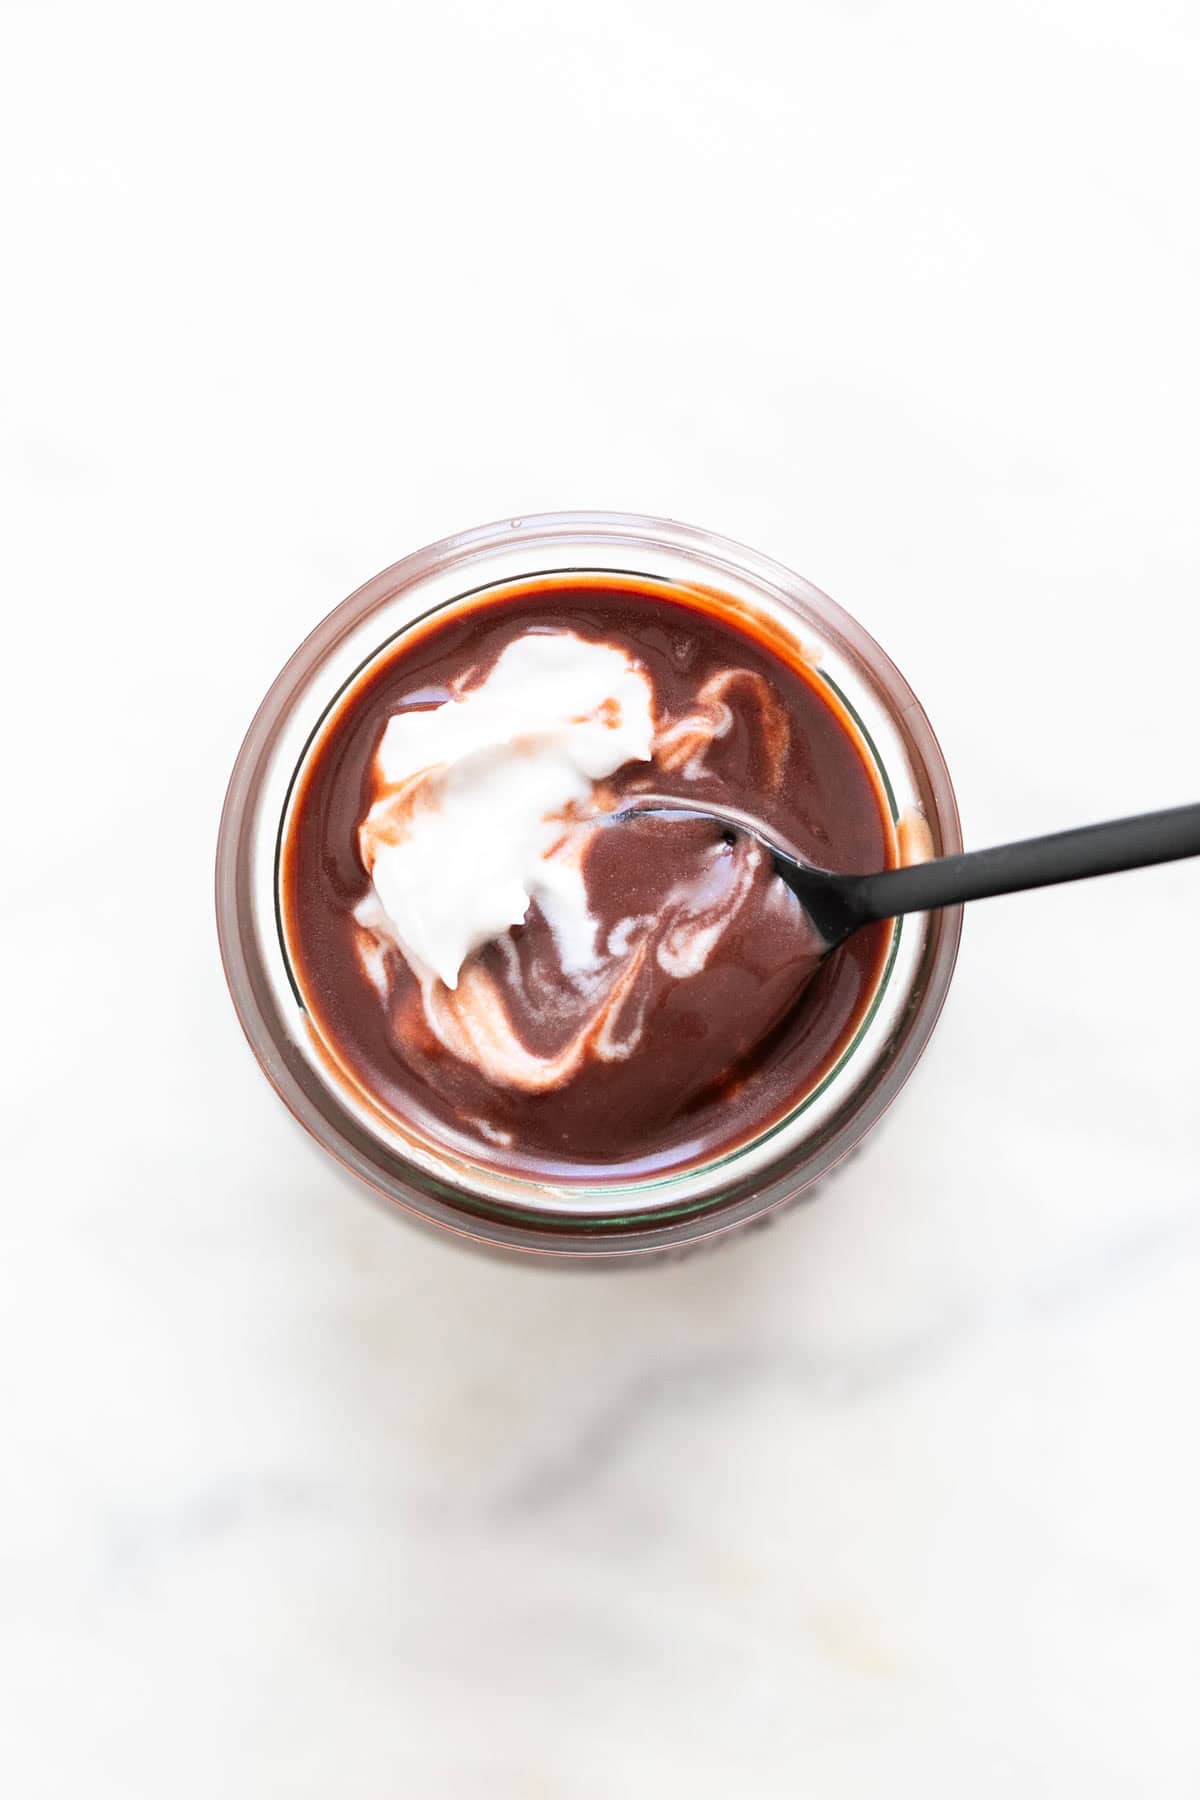 Vegan chocolate pudding in a glass with a spoon.